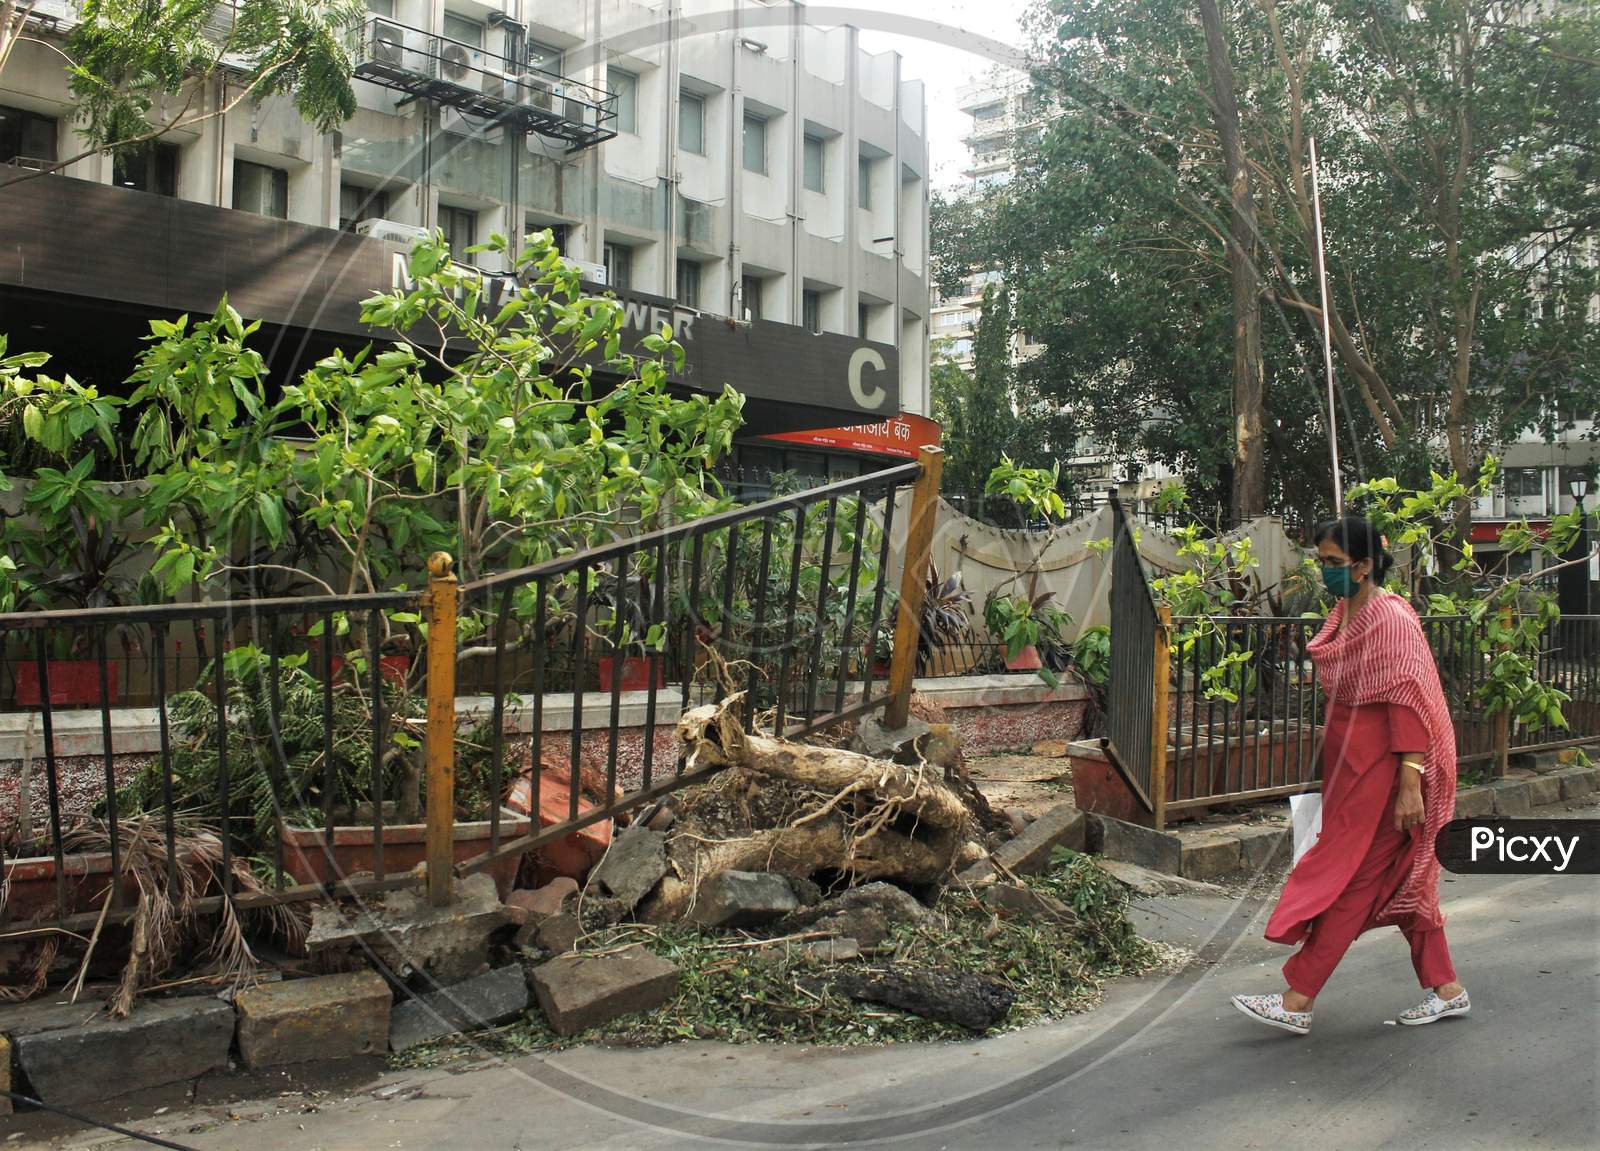 A woman walks past an uprooted pavement railing, after cyclone Nisarga made its landfall on June 3, on the outskirts of the city, in Mumbai, India, June 5, 2020.